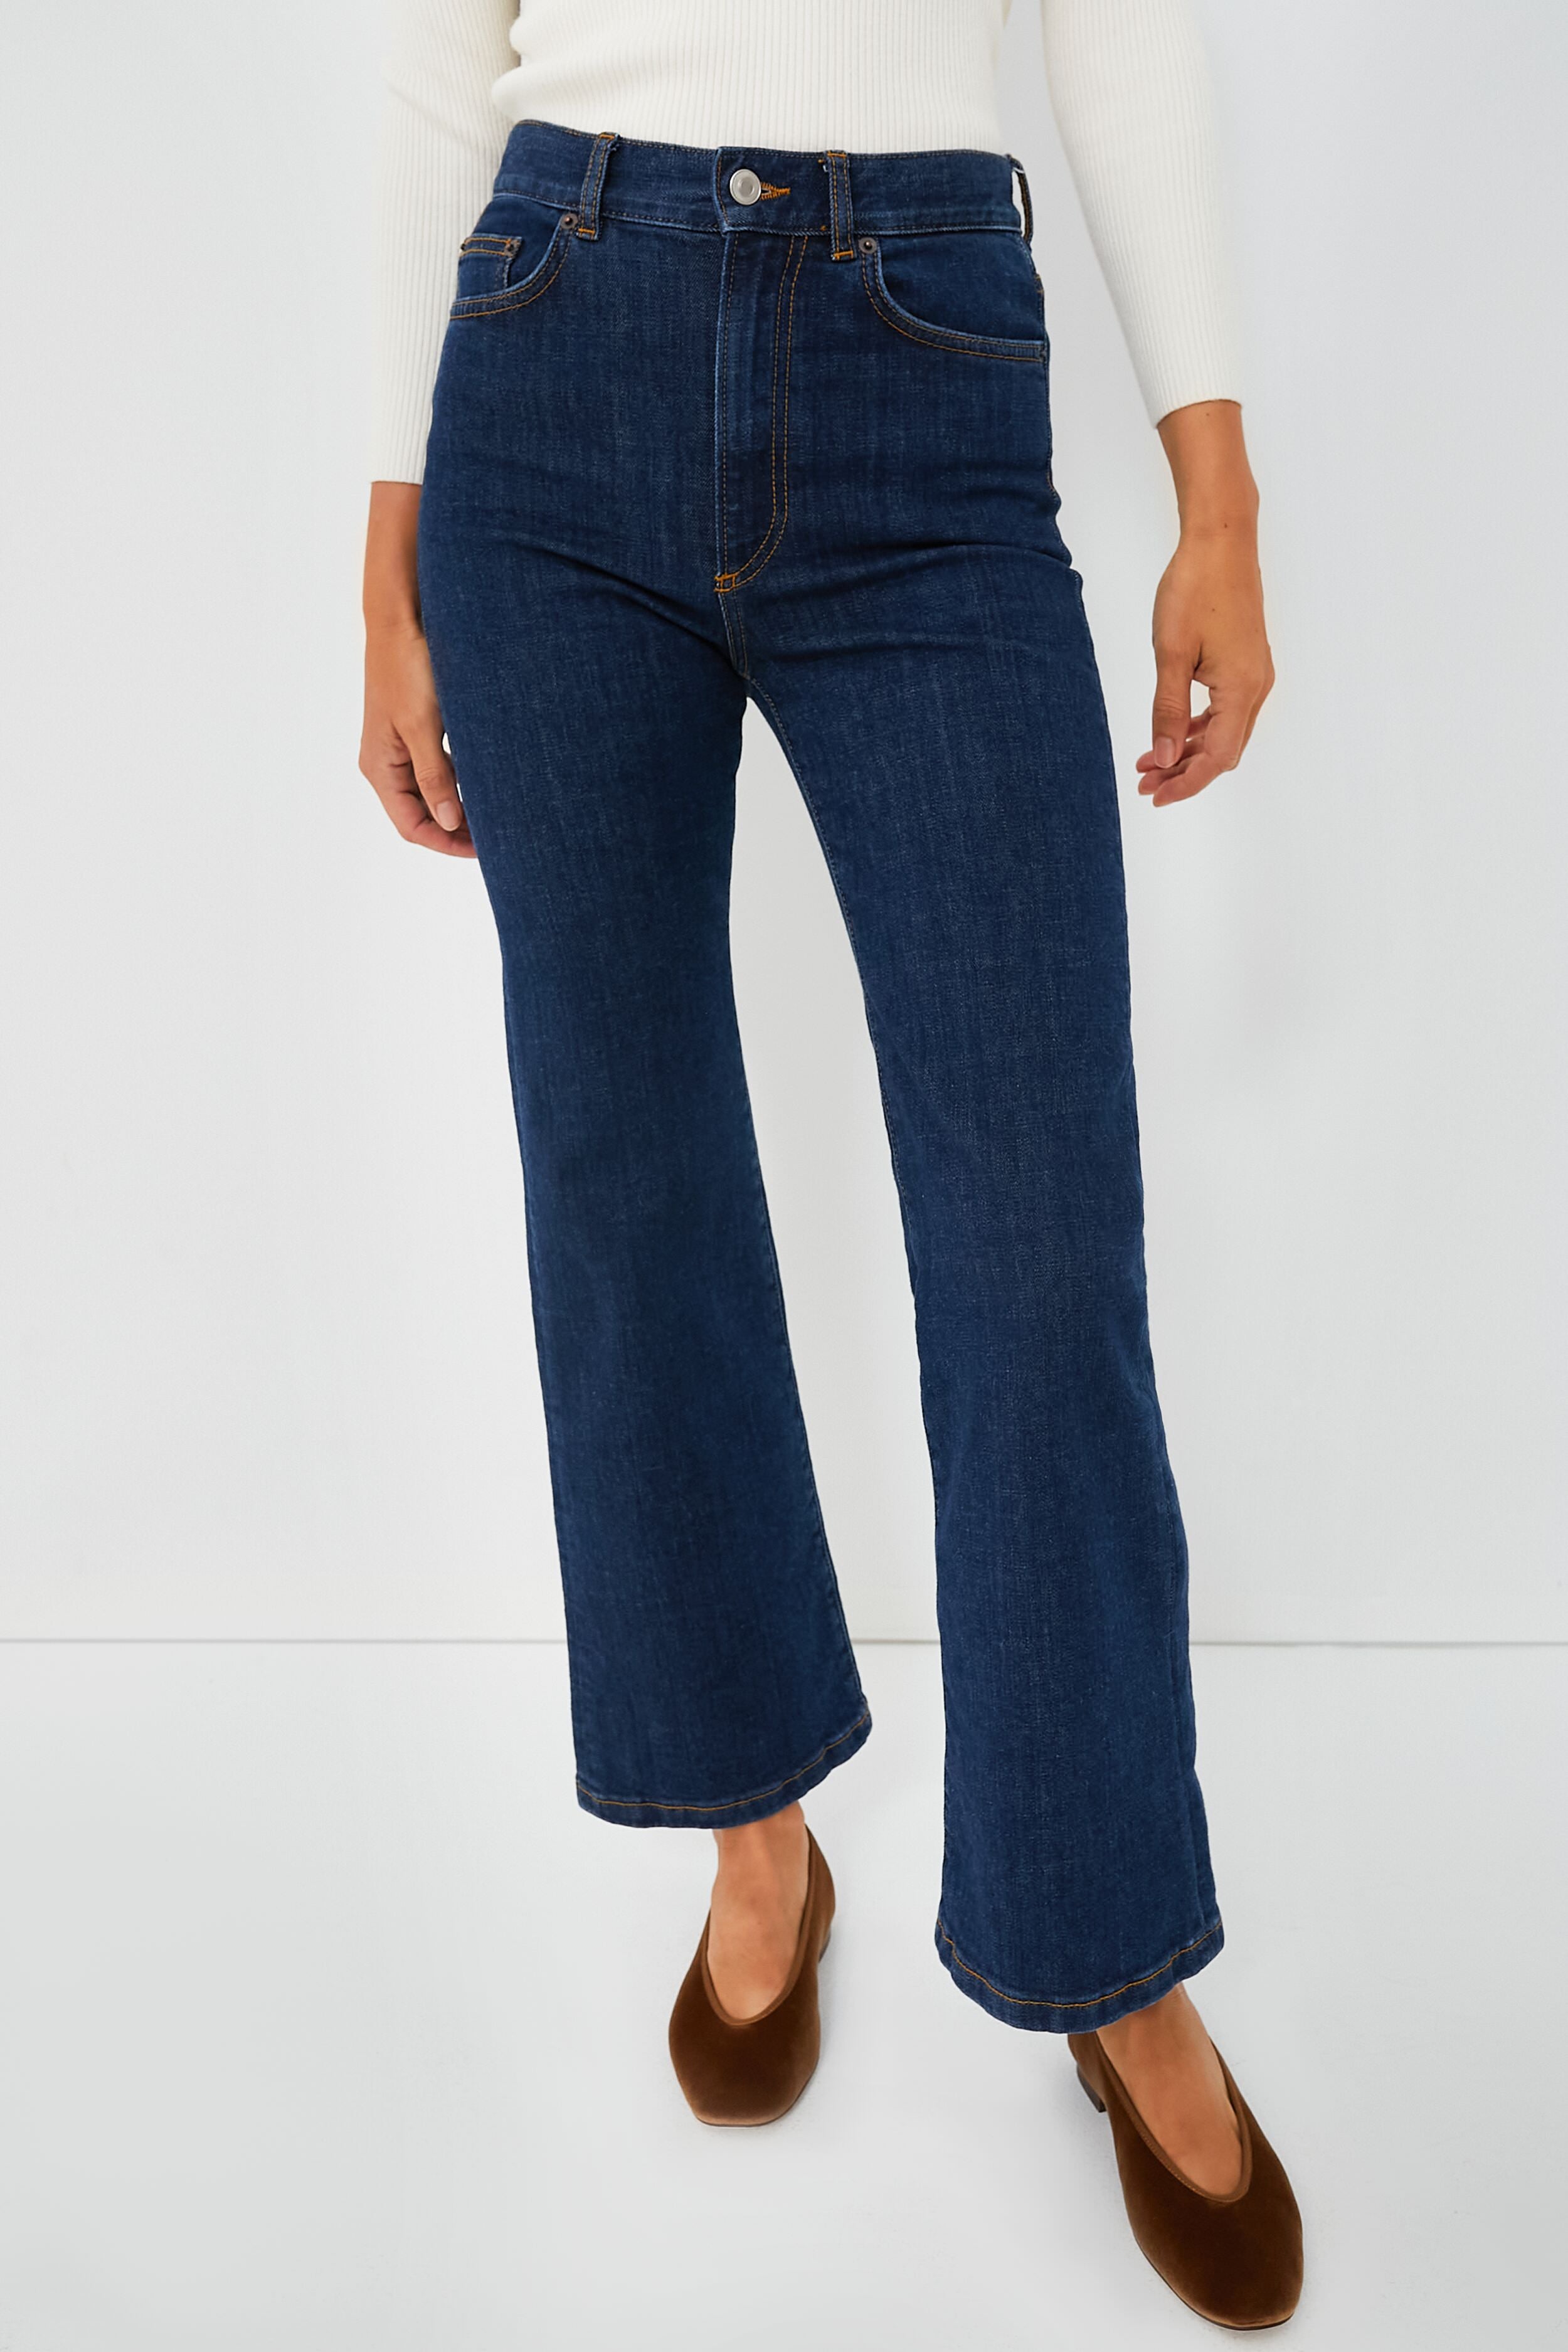 Blue 2 Weeks Pyramid Jeans | Jeanerica